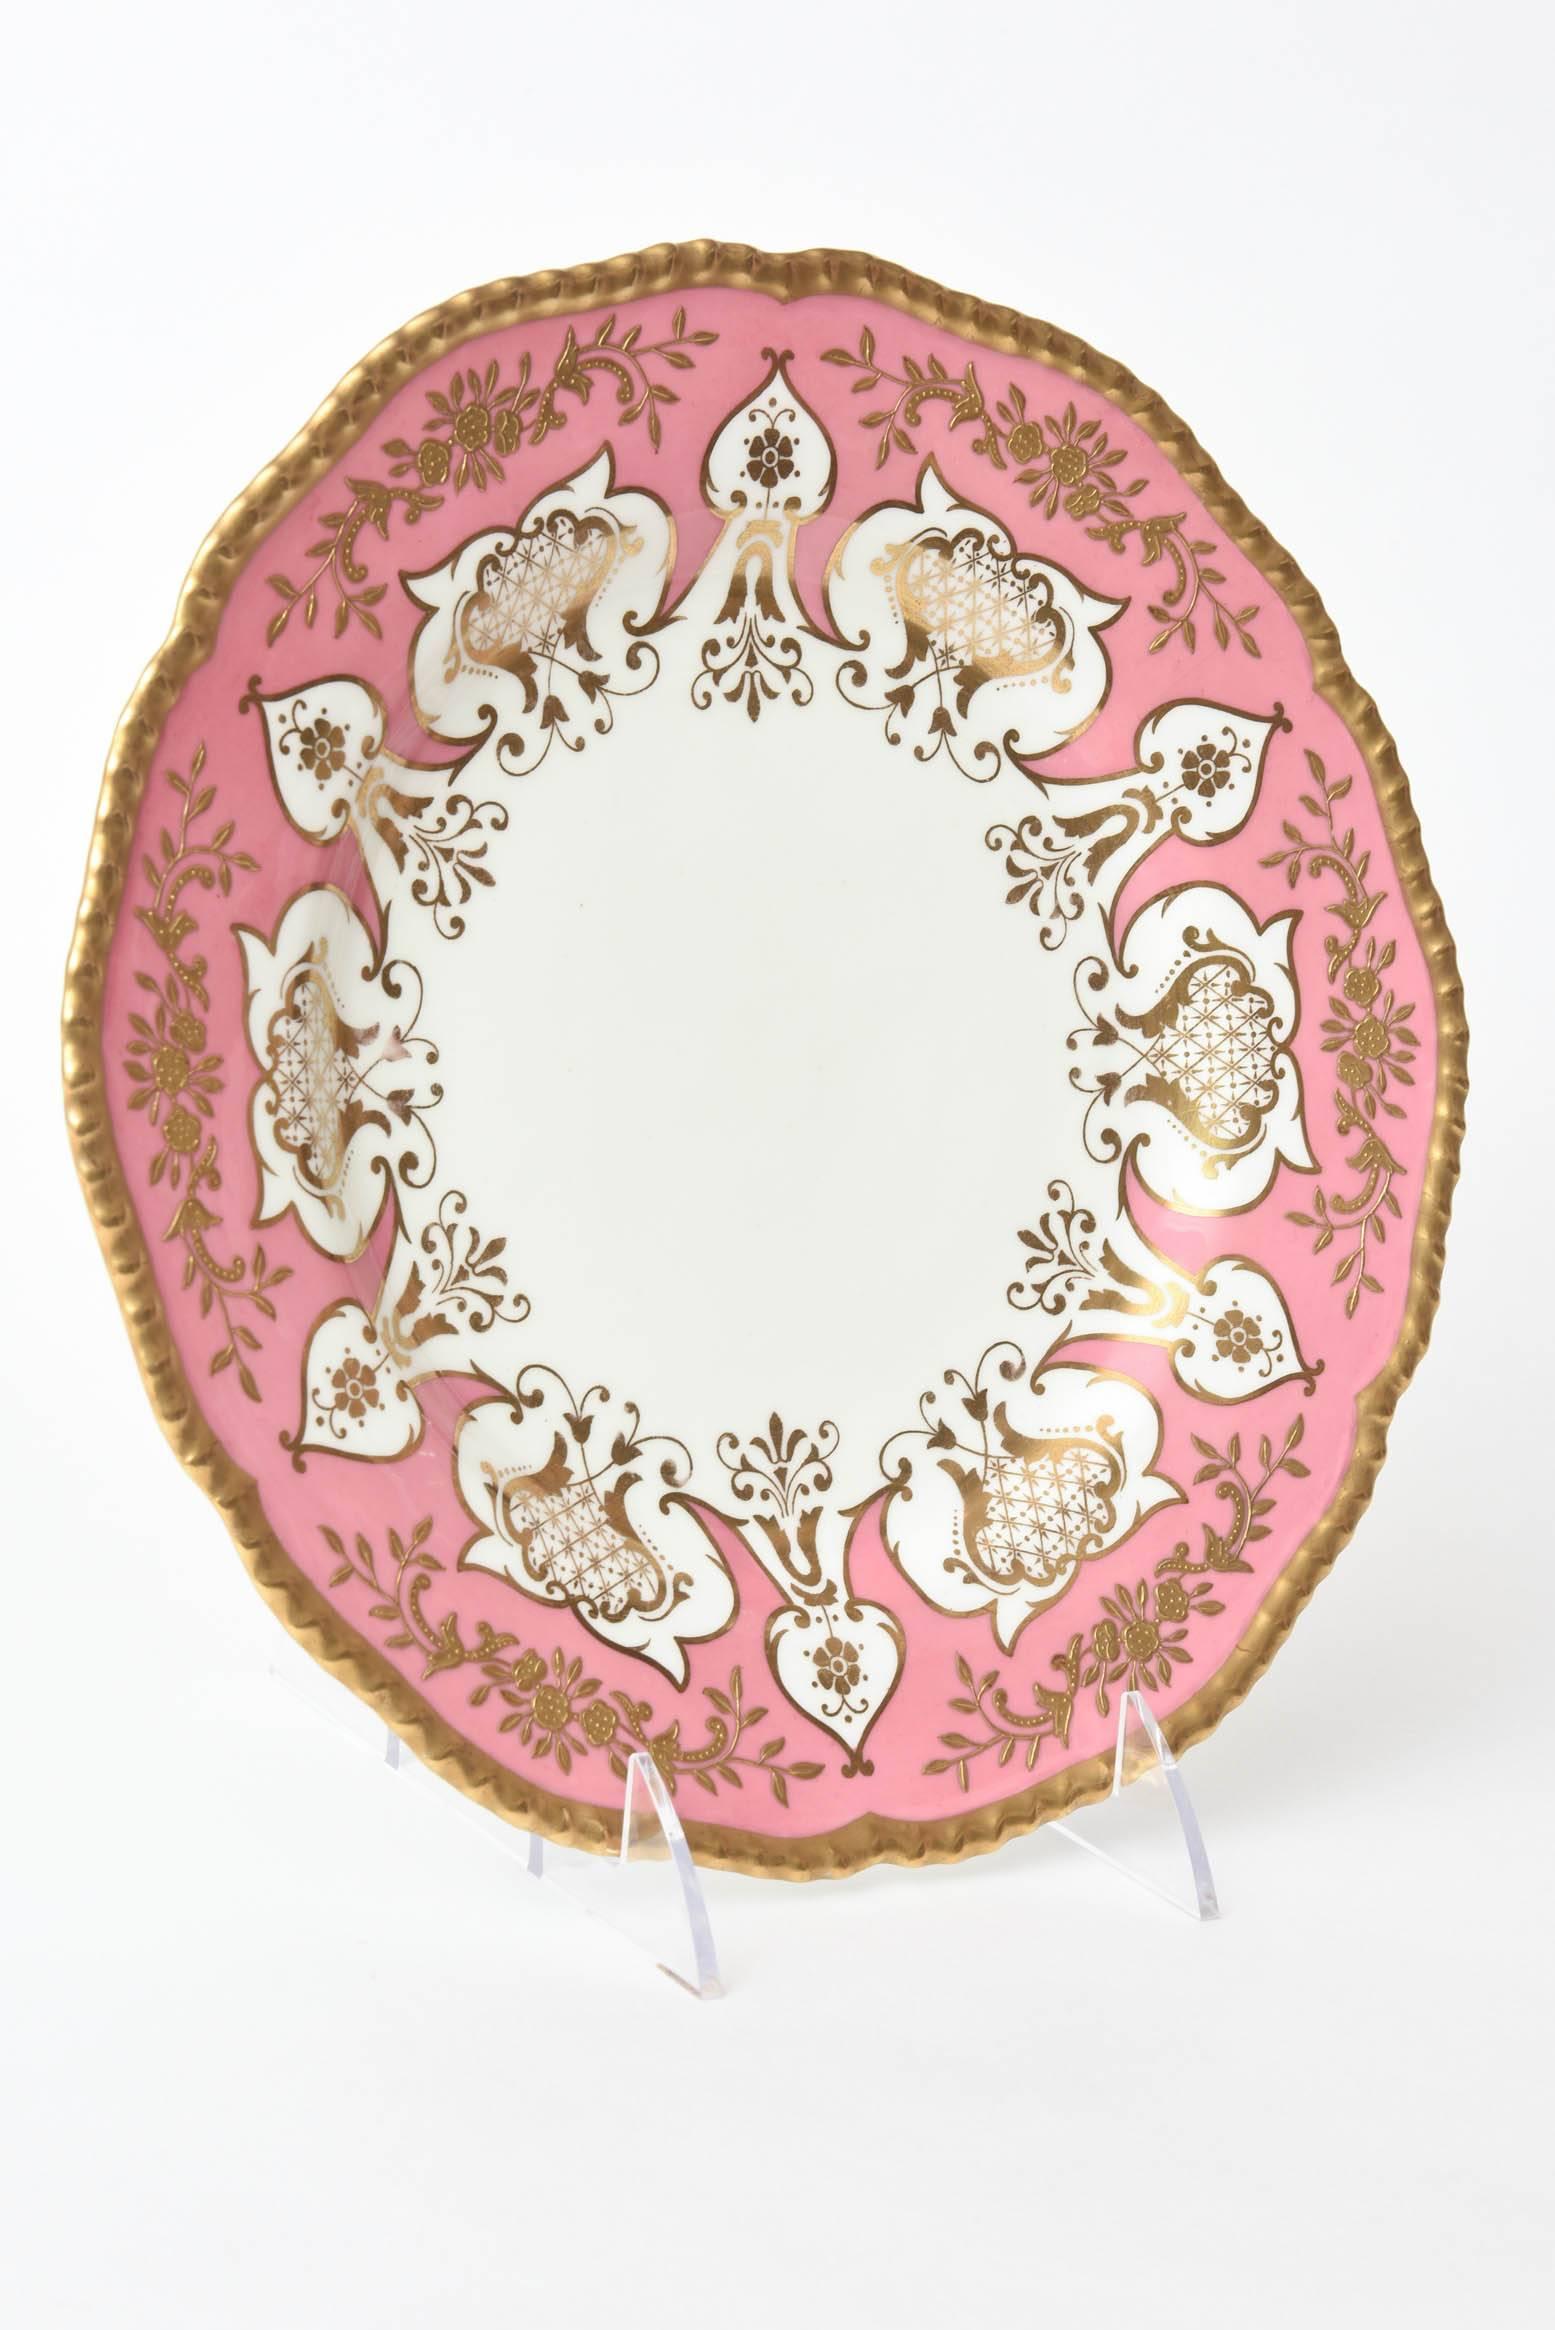 A stunning and vibrant set of pretty pink and gilt encrusted plates. 12 total. A beautiful scalloped and gadrooned edge and with custom retailer hall marks. An exotic cut-out design in the pink shoulder. A rare and special set in wonderful antique